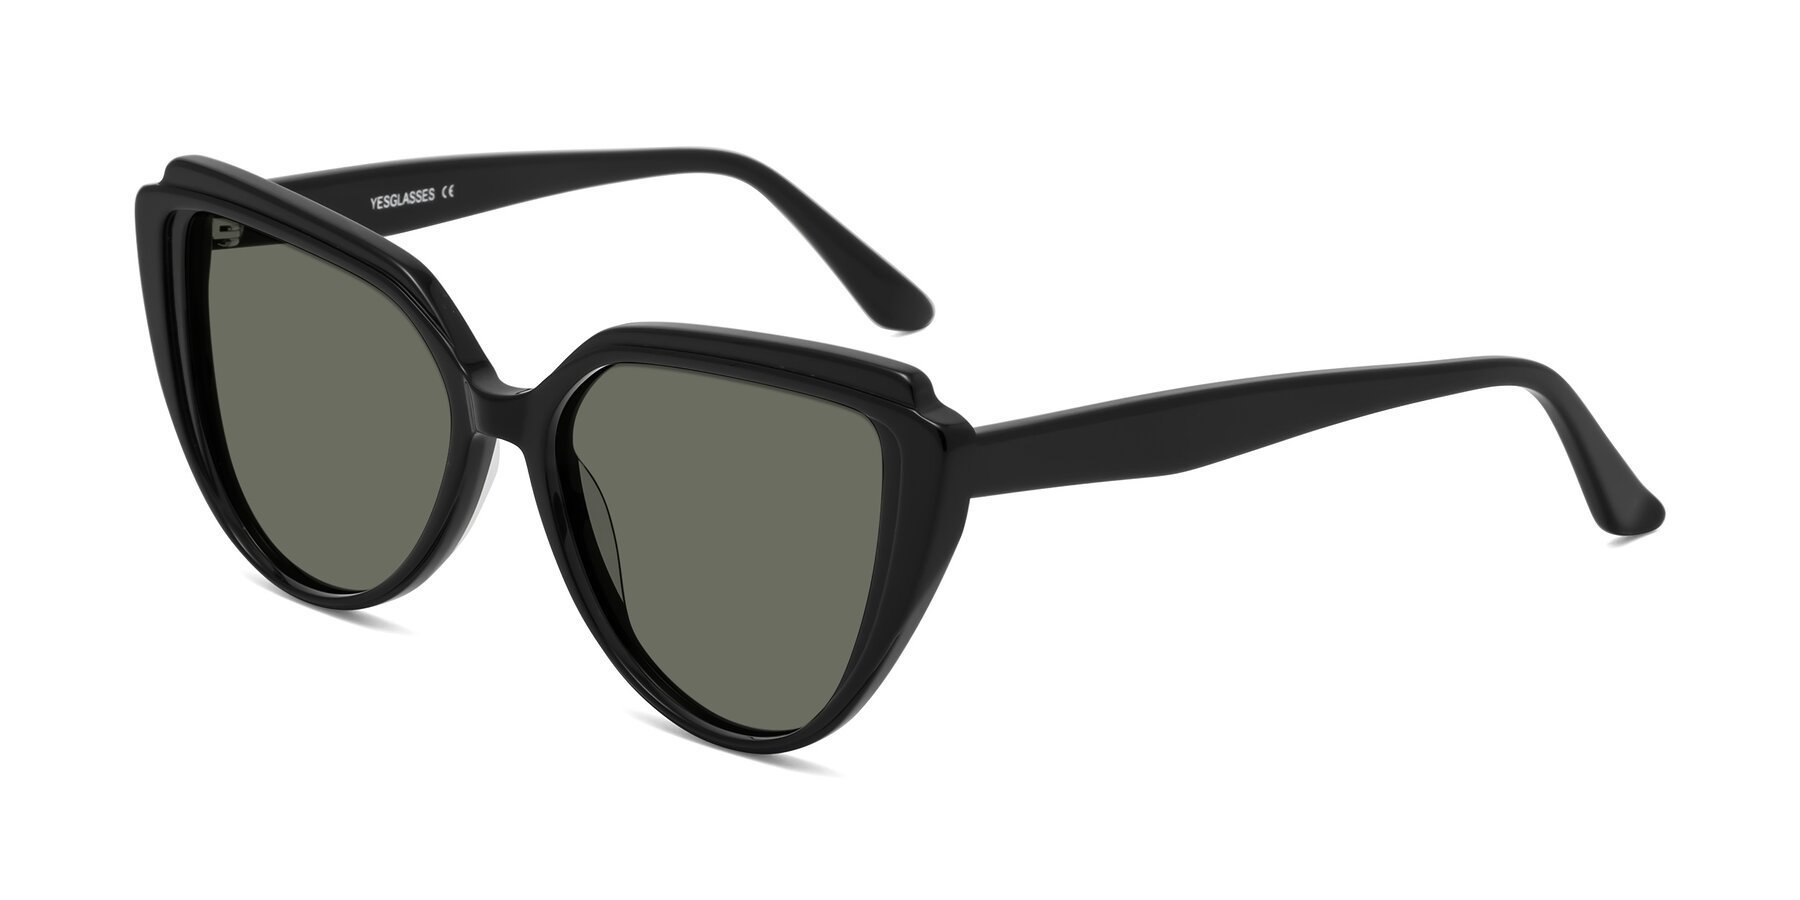 Angle of Zubar in Black with Gray Polarized Lenses